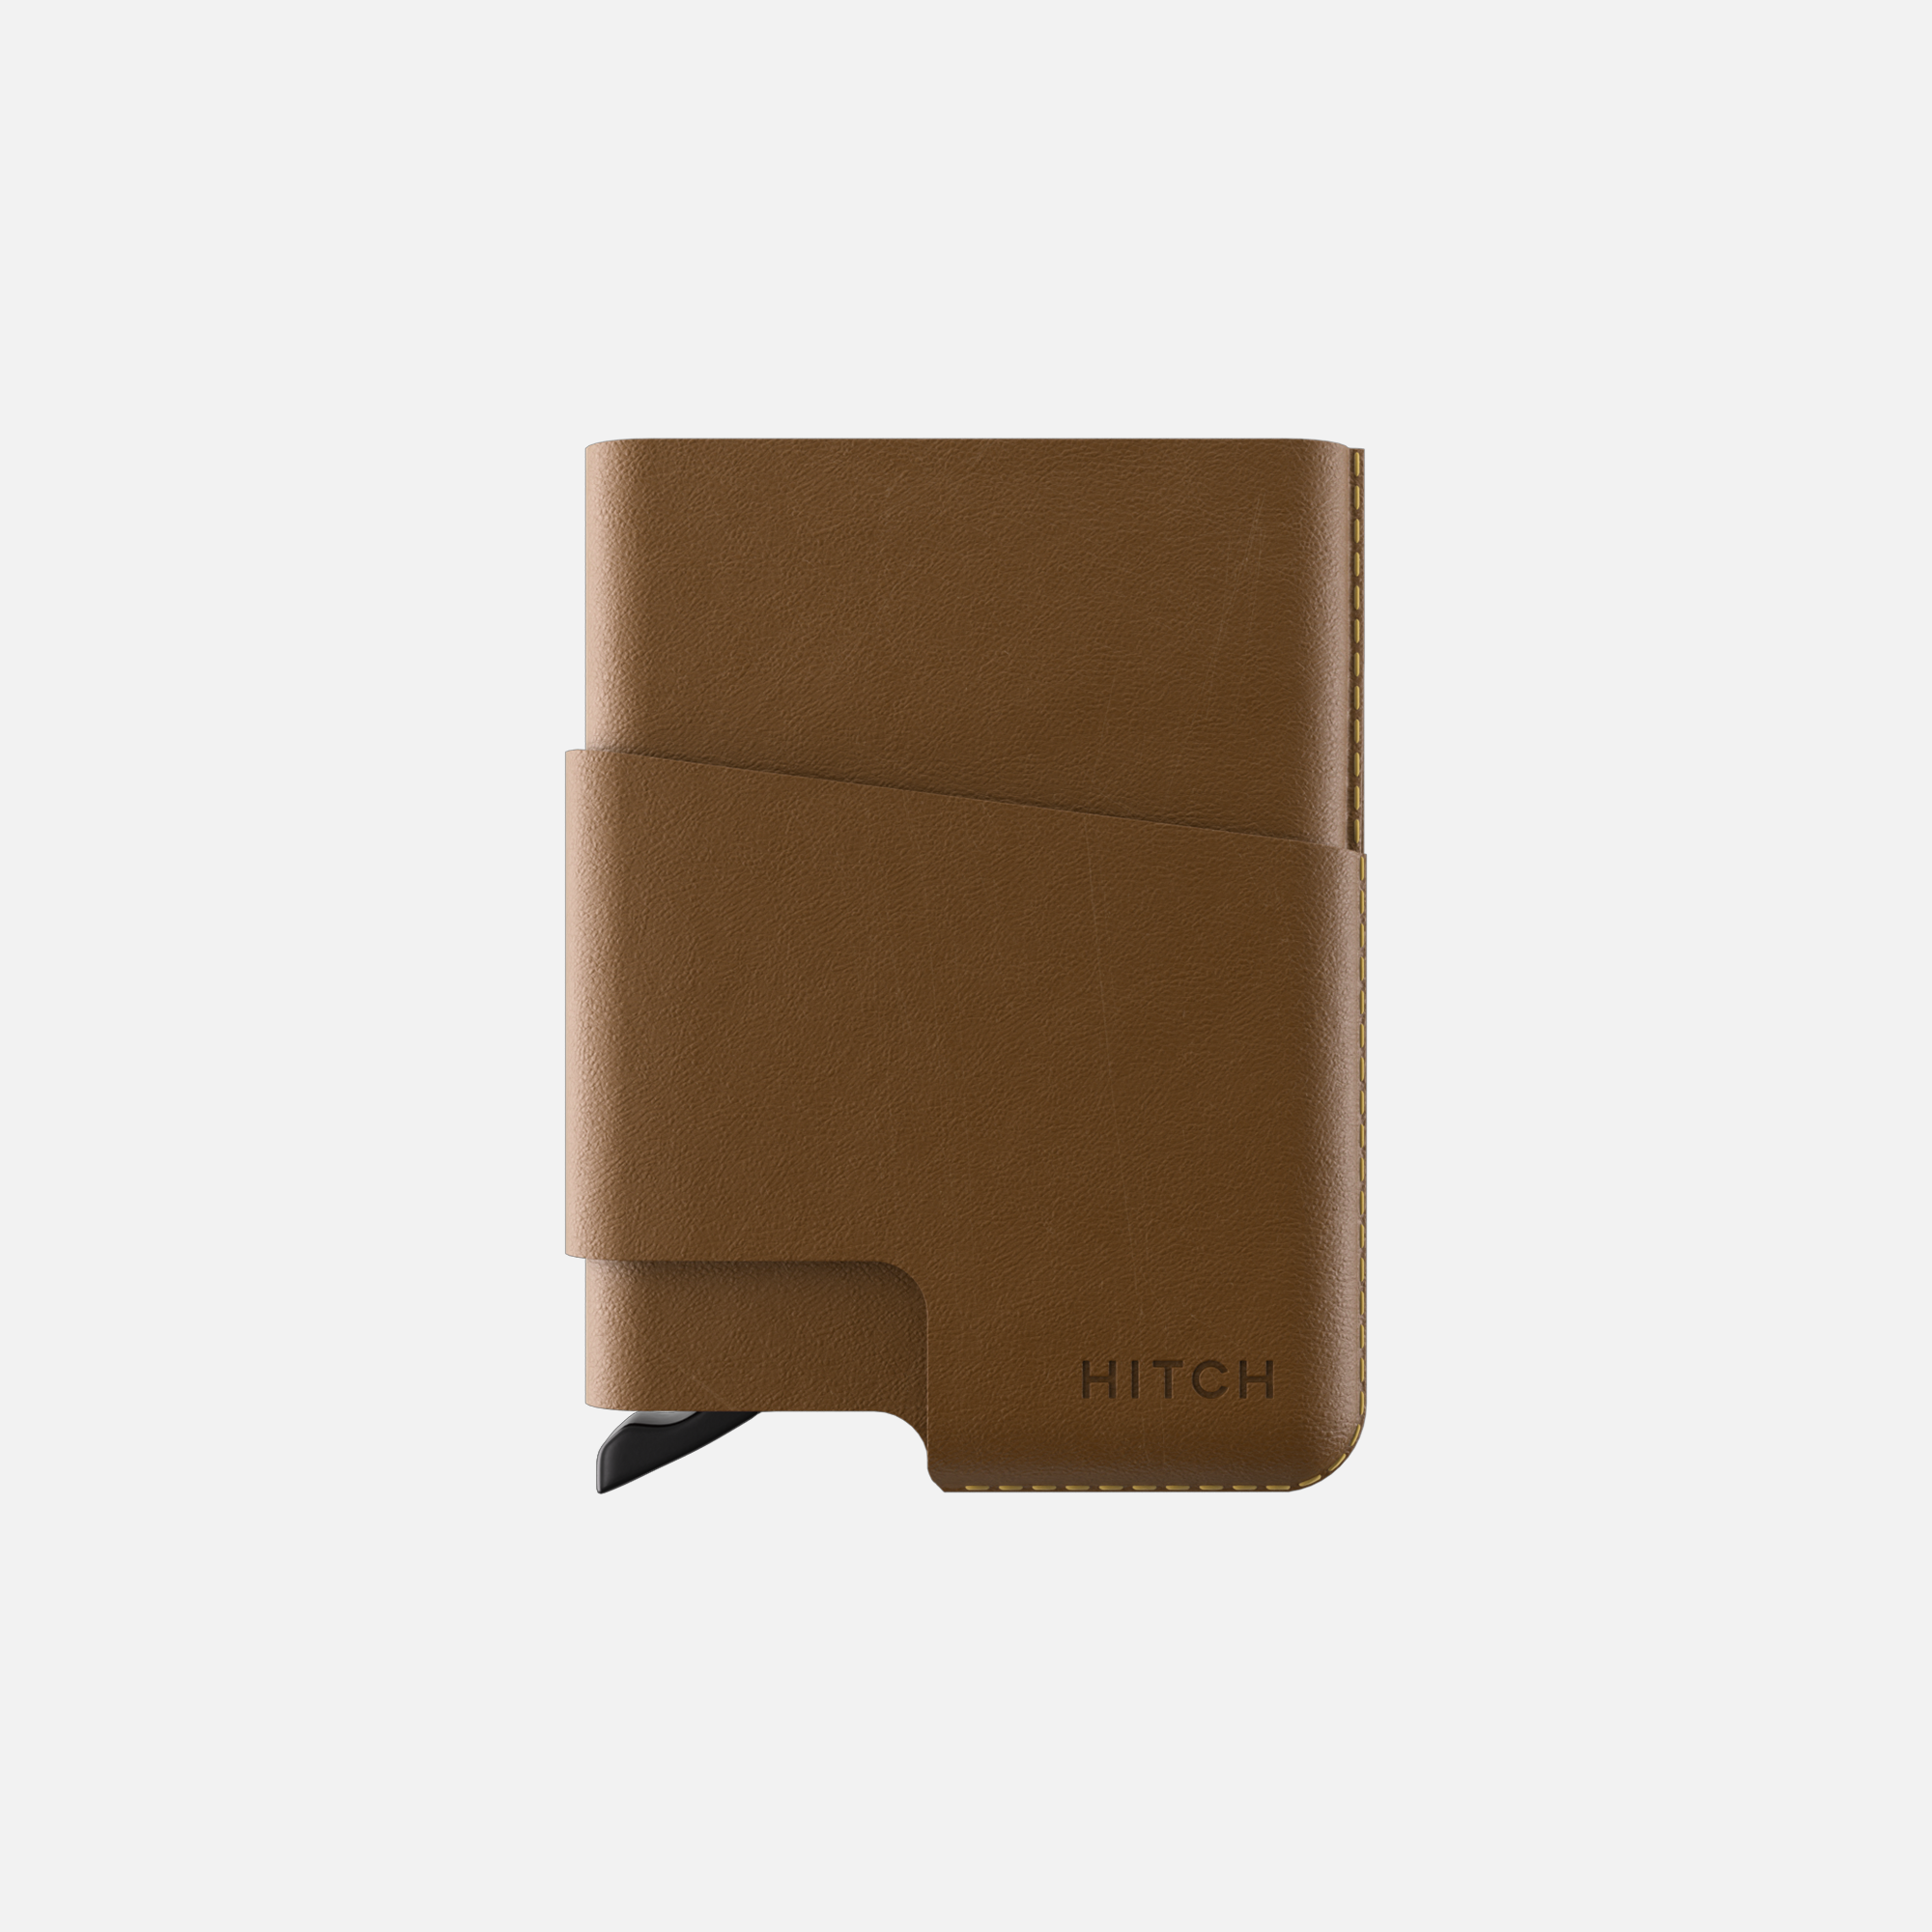 Brown leather cardholder cover with elastic closure on a white background."